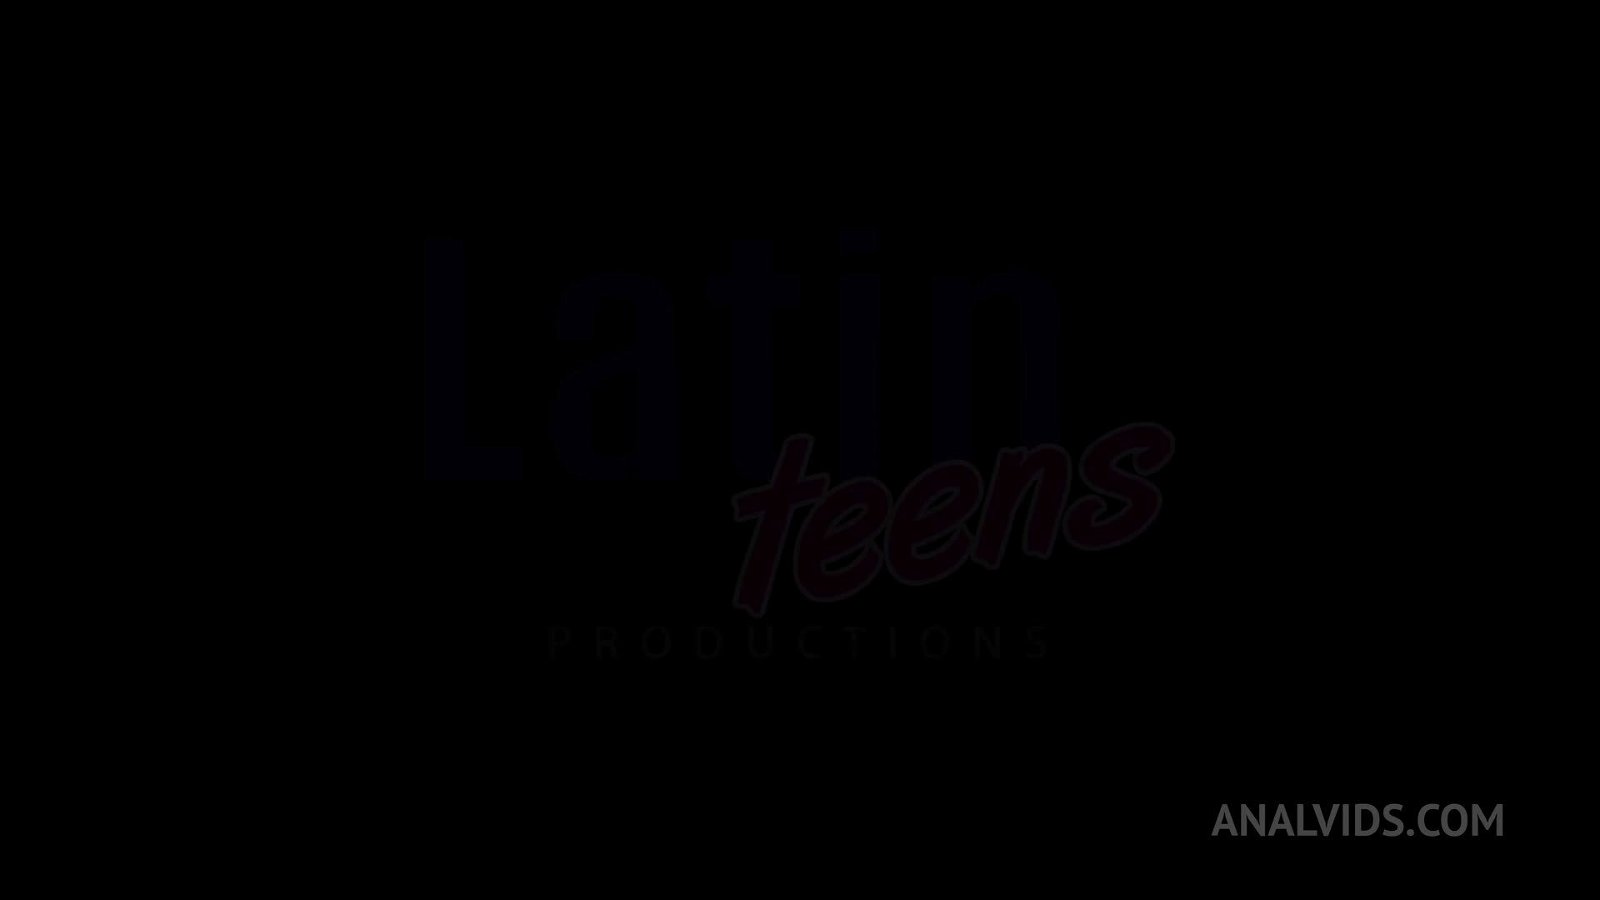 Video by AnalVids with the username @AnalVids, who is a brand user,  April 29, 2022 at 9:55 AM. The post is about the topic Latinas and the text says '5 guys for LUANA HONEY

#LuanaHoney #Bruno #DavidBander #AlexHard #JackMiller #LBrandon 

🍑 https://sharesome.com/get/5guys'